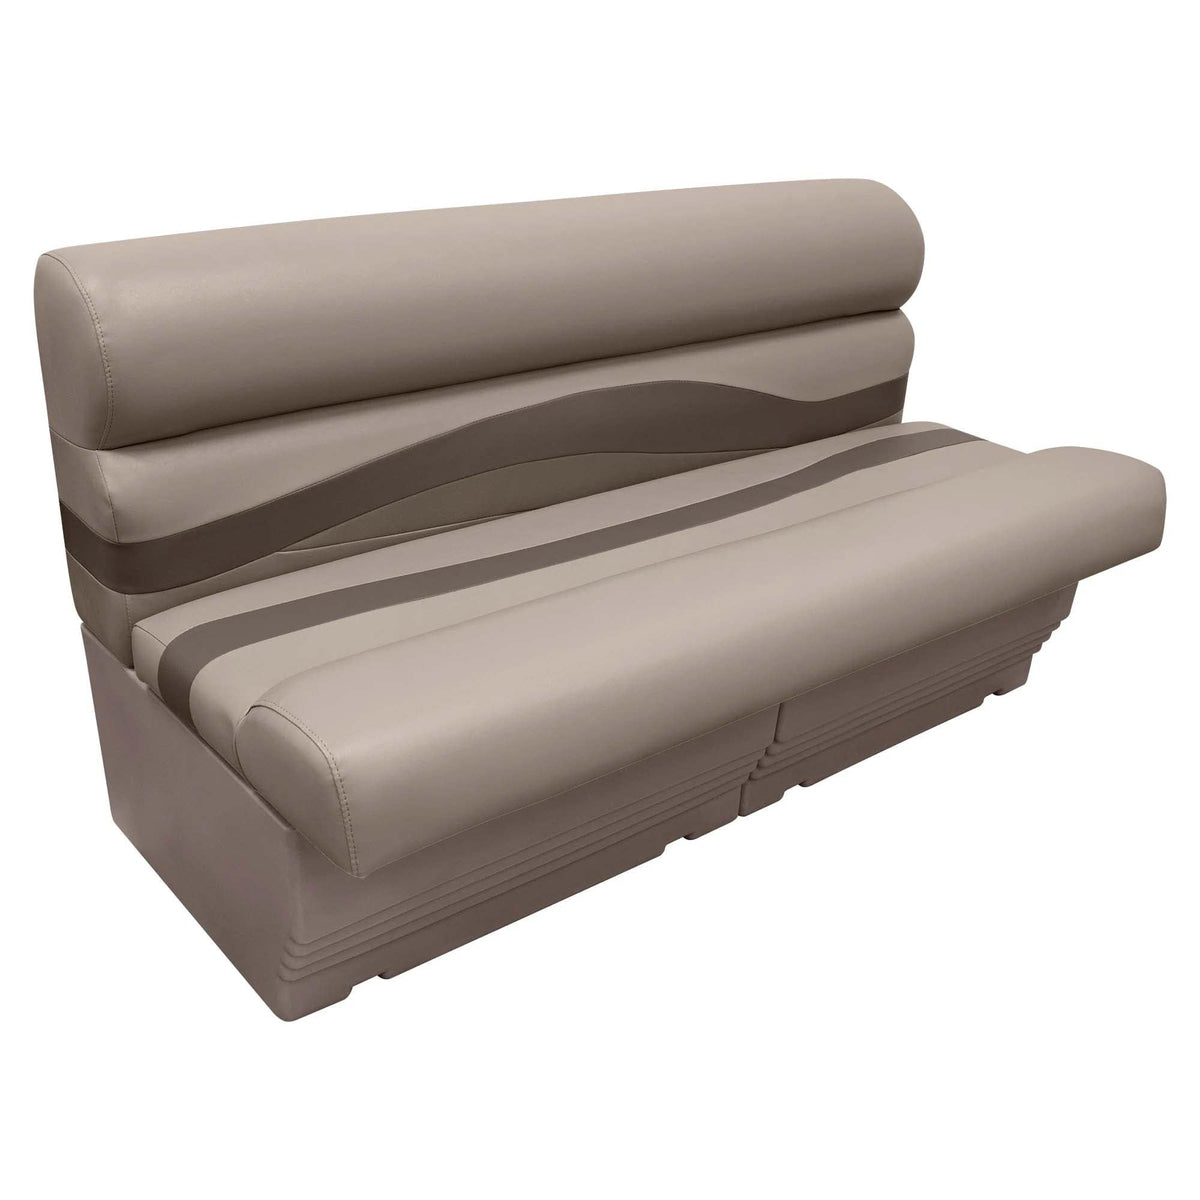 Wise Not Qualified for Free Shipping Wise Premier Pontoon 55" Bench #BM1155-1749